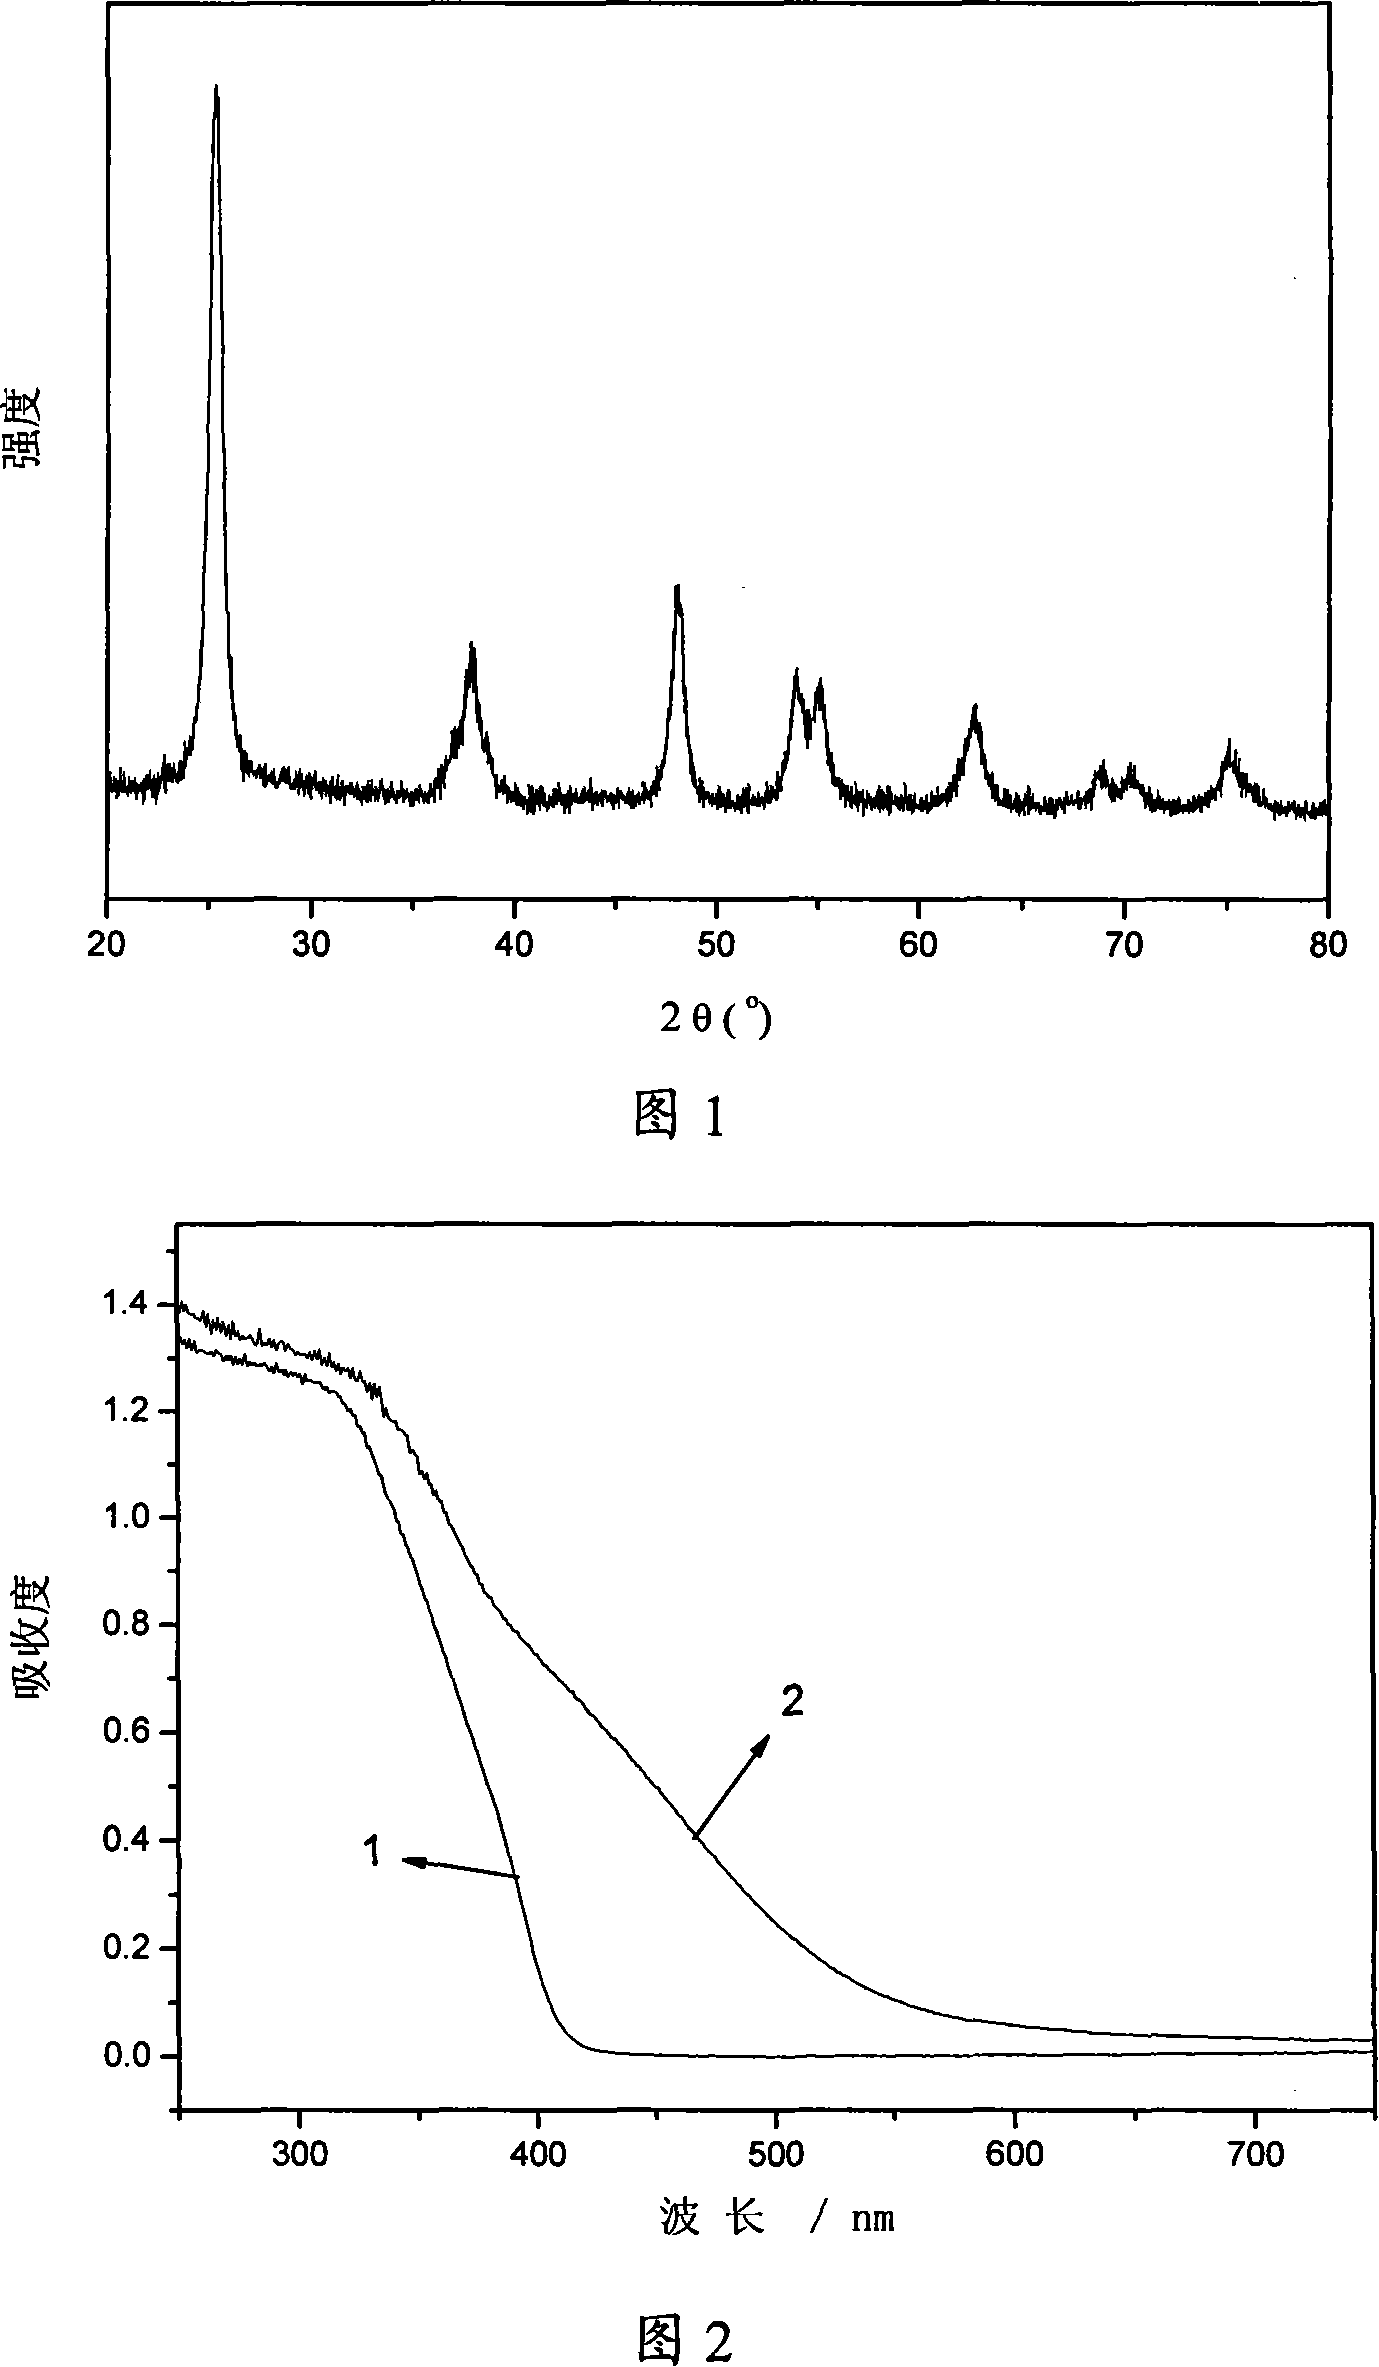 Kation S and anion N doped one-dimensional nano-structured Ti0* photocatalyst and method of producing the same